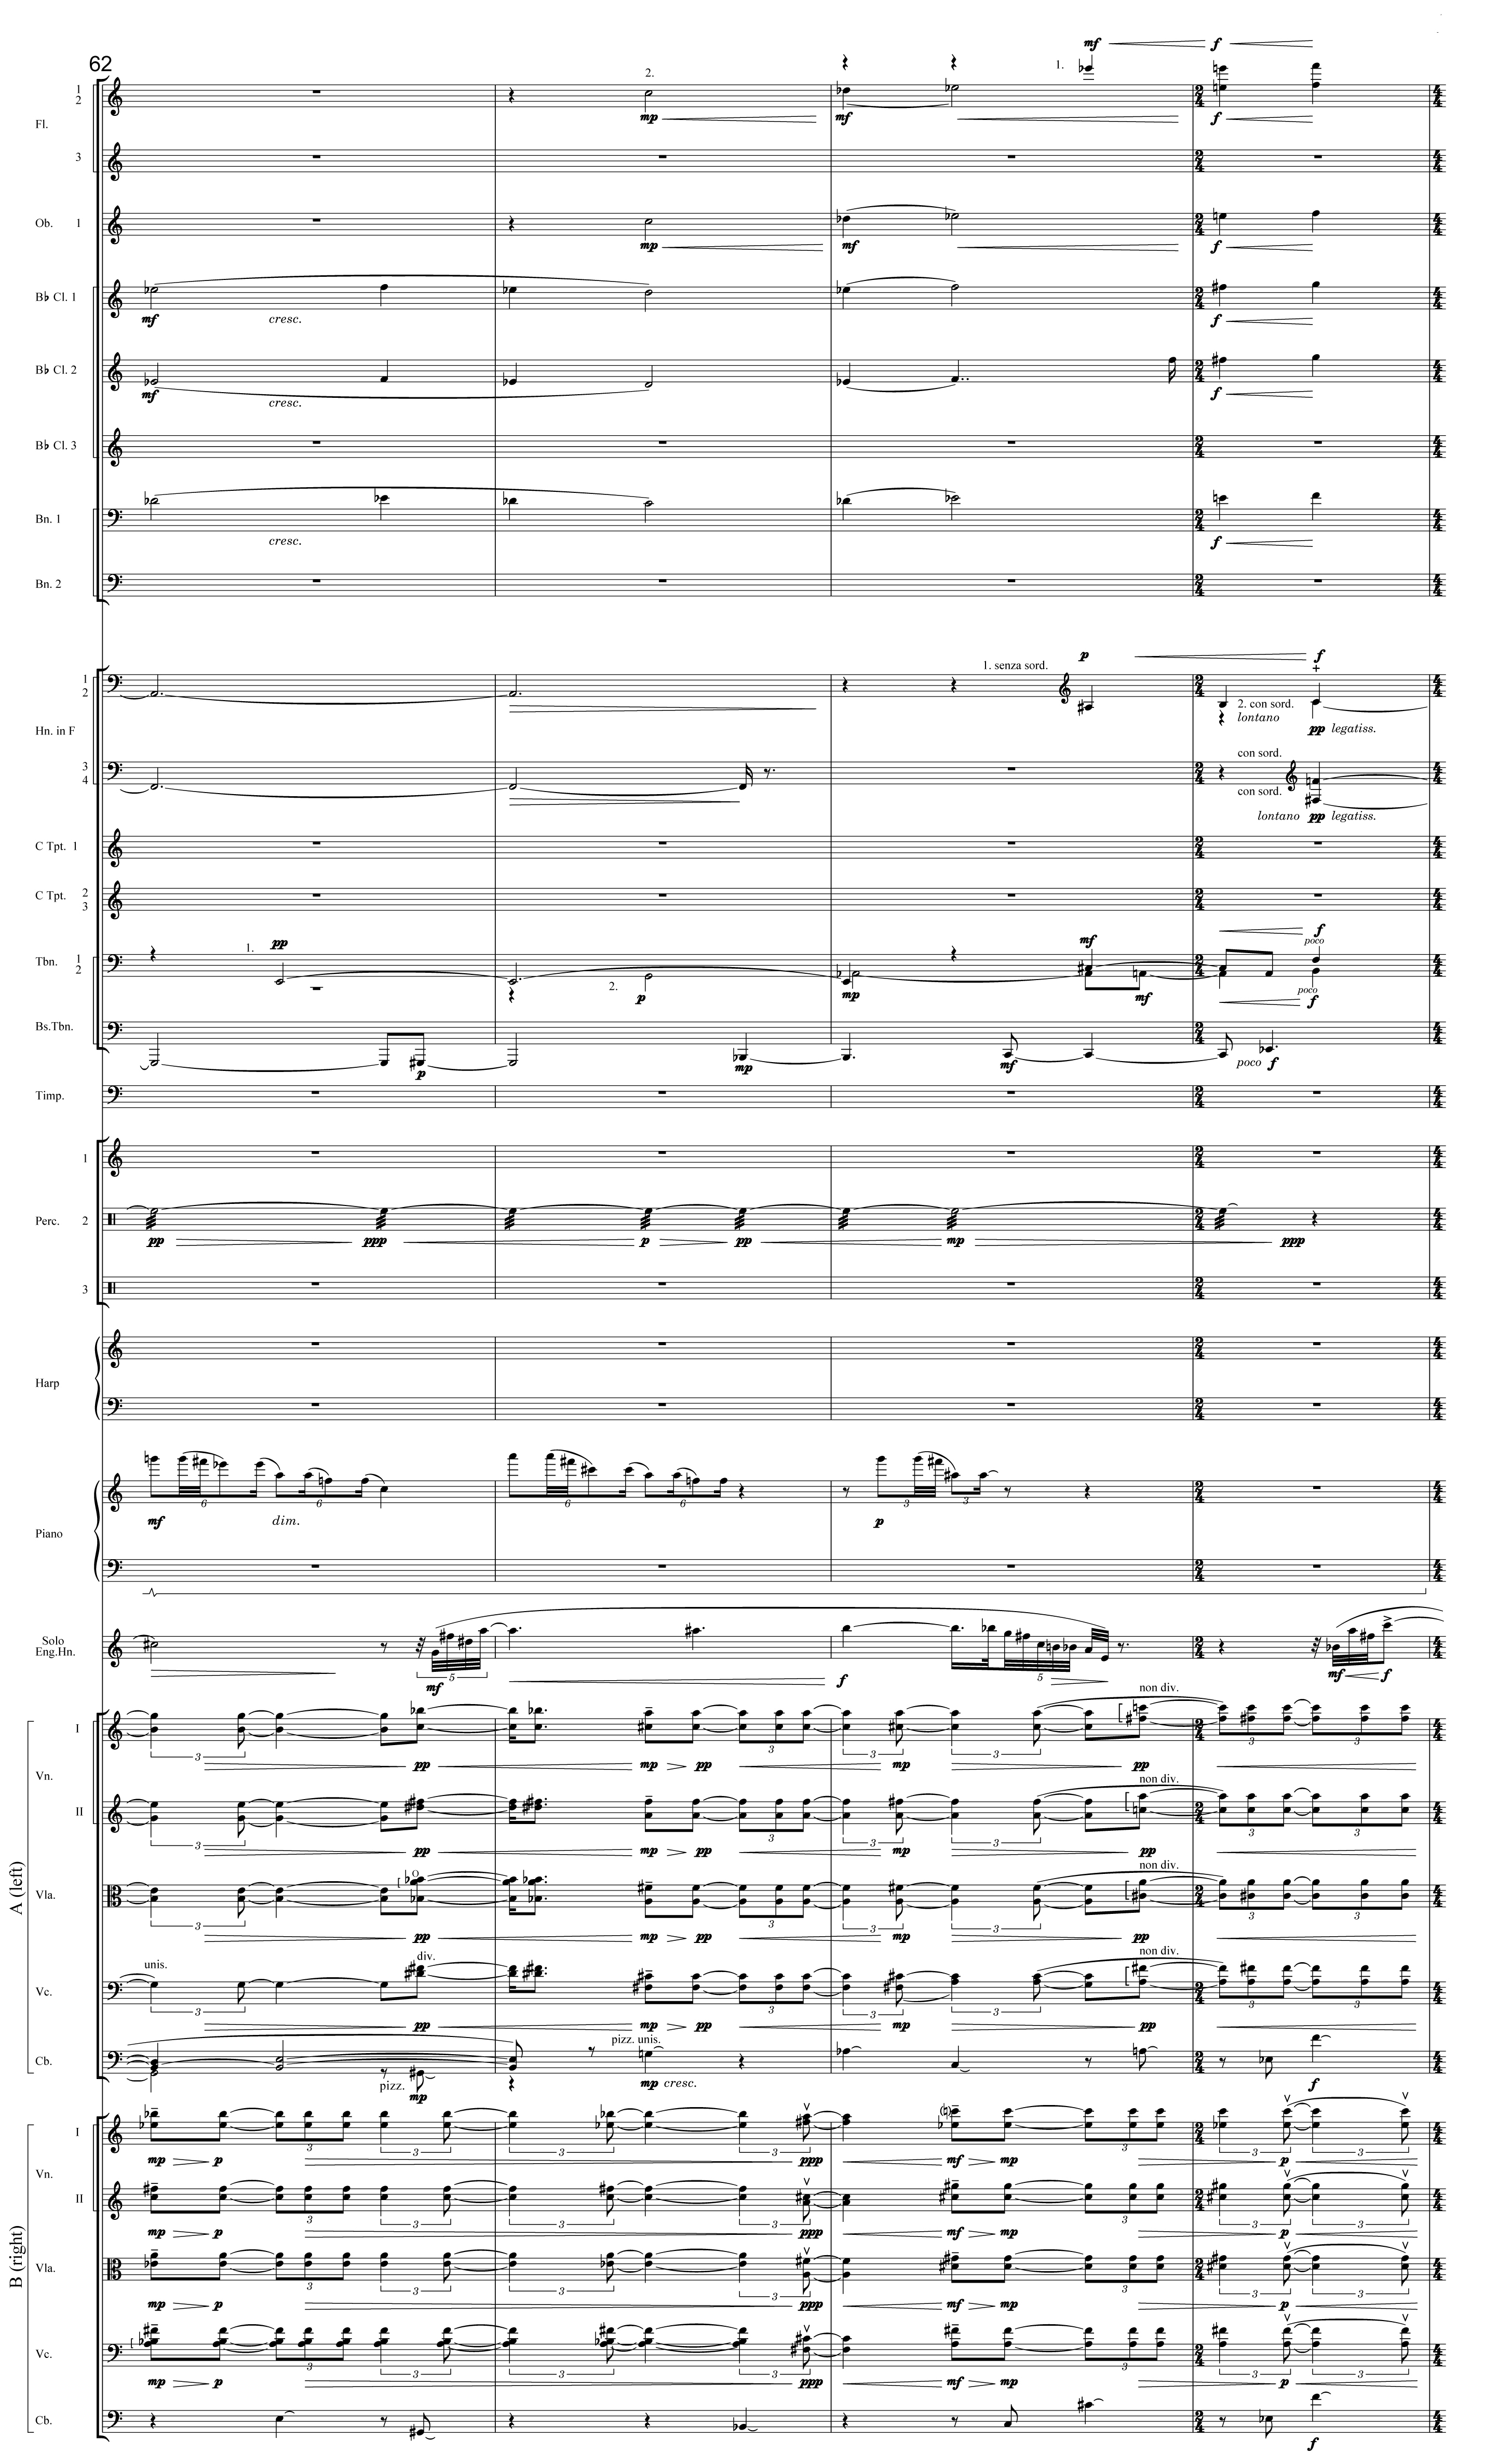 Score sample from Colored Field (English horn version) Copyright © 1994 by Associated Music Publishers, Inc., (BMI), New York, NY International Copyright Secured. All Rights Reserved. Used by Permission.